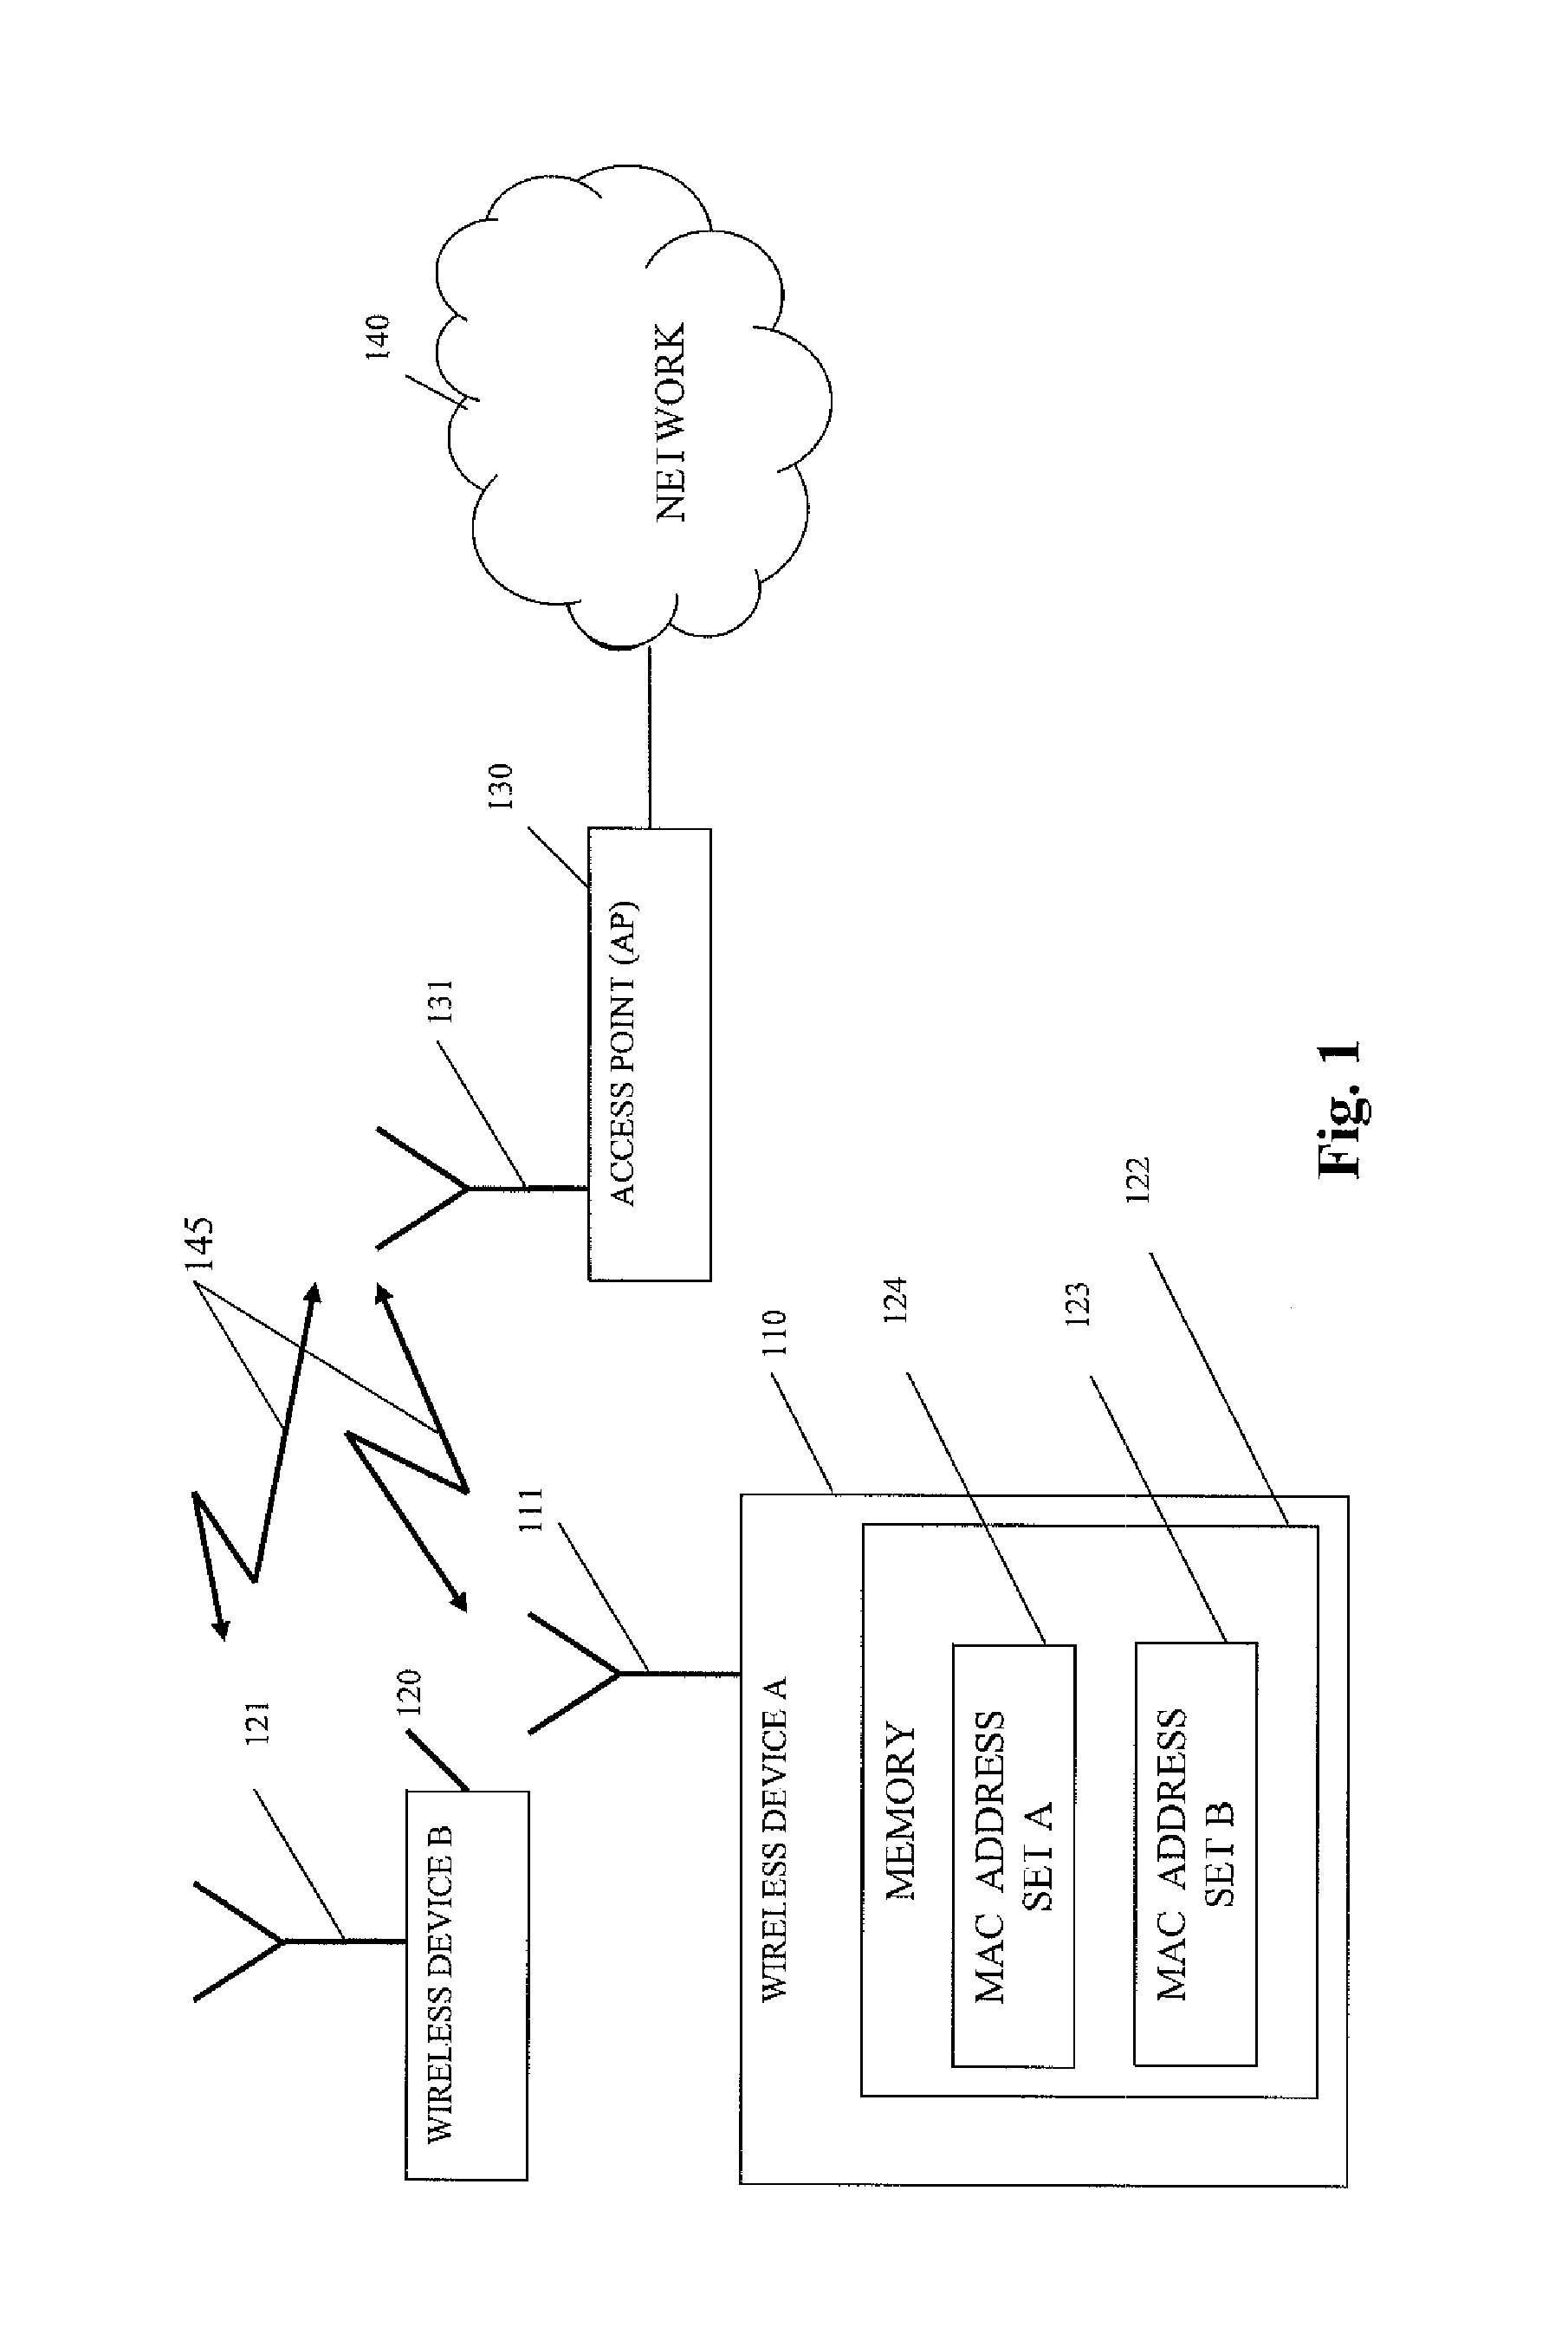 System and method for maintaining privacy in a wireless network